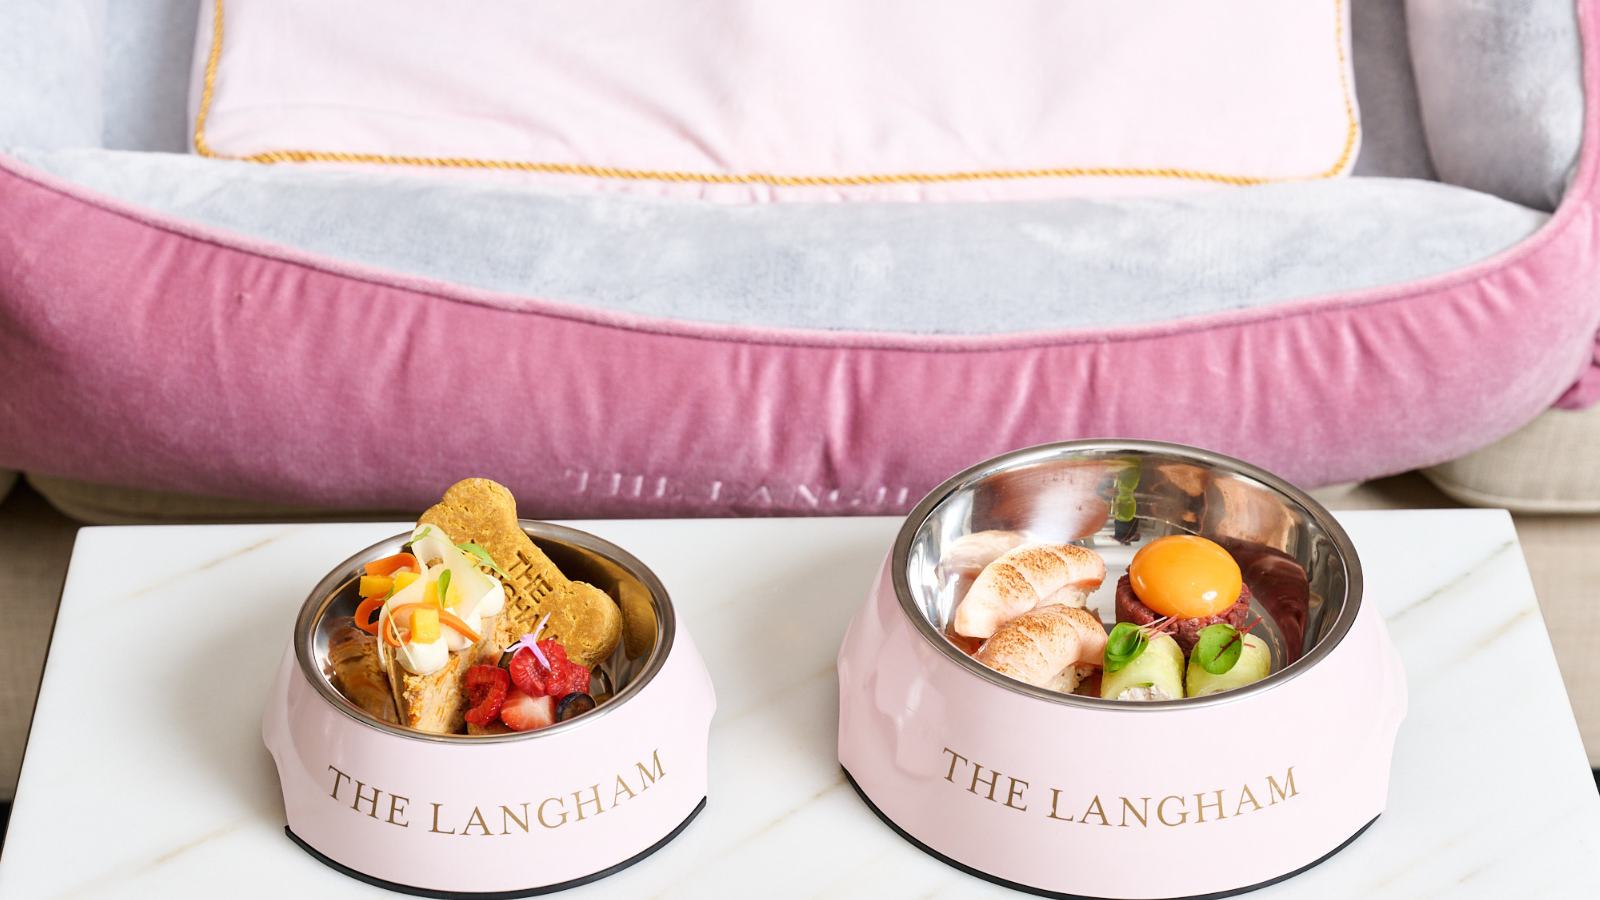 The Langham Sydney Luxury Hotel room offer "pampered pets staycation"